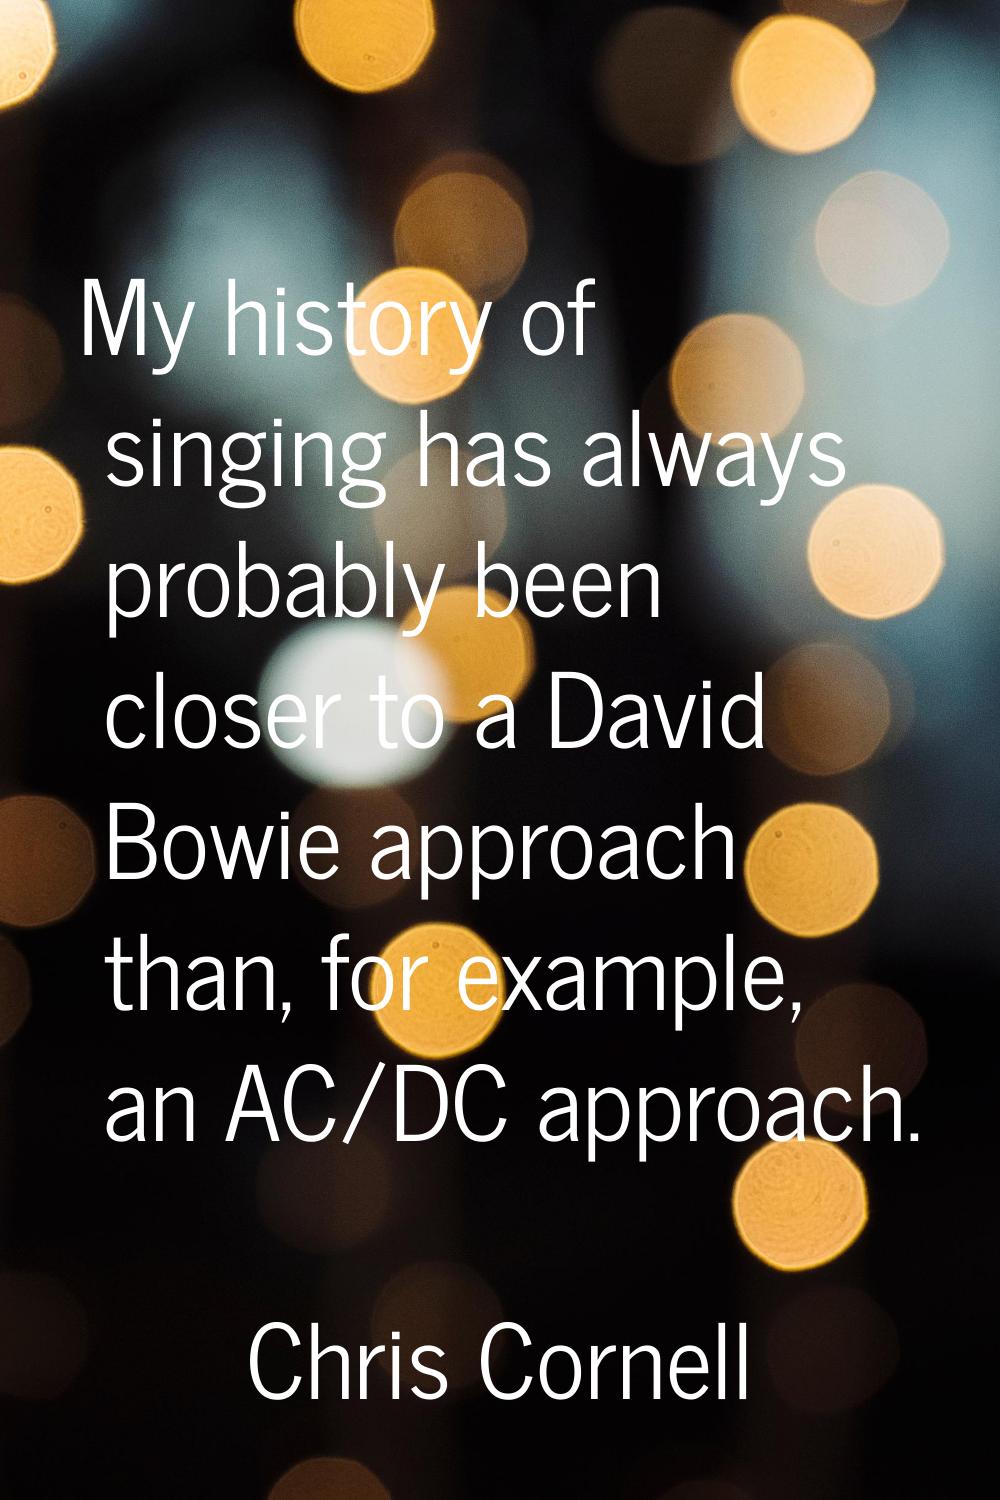 My history of singing has always probably been closer to a David Bowie approach than, for example, 